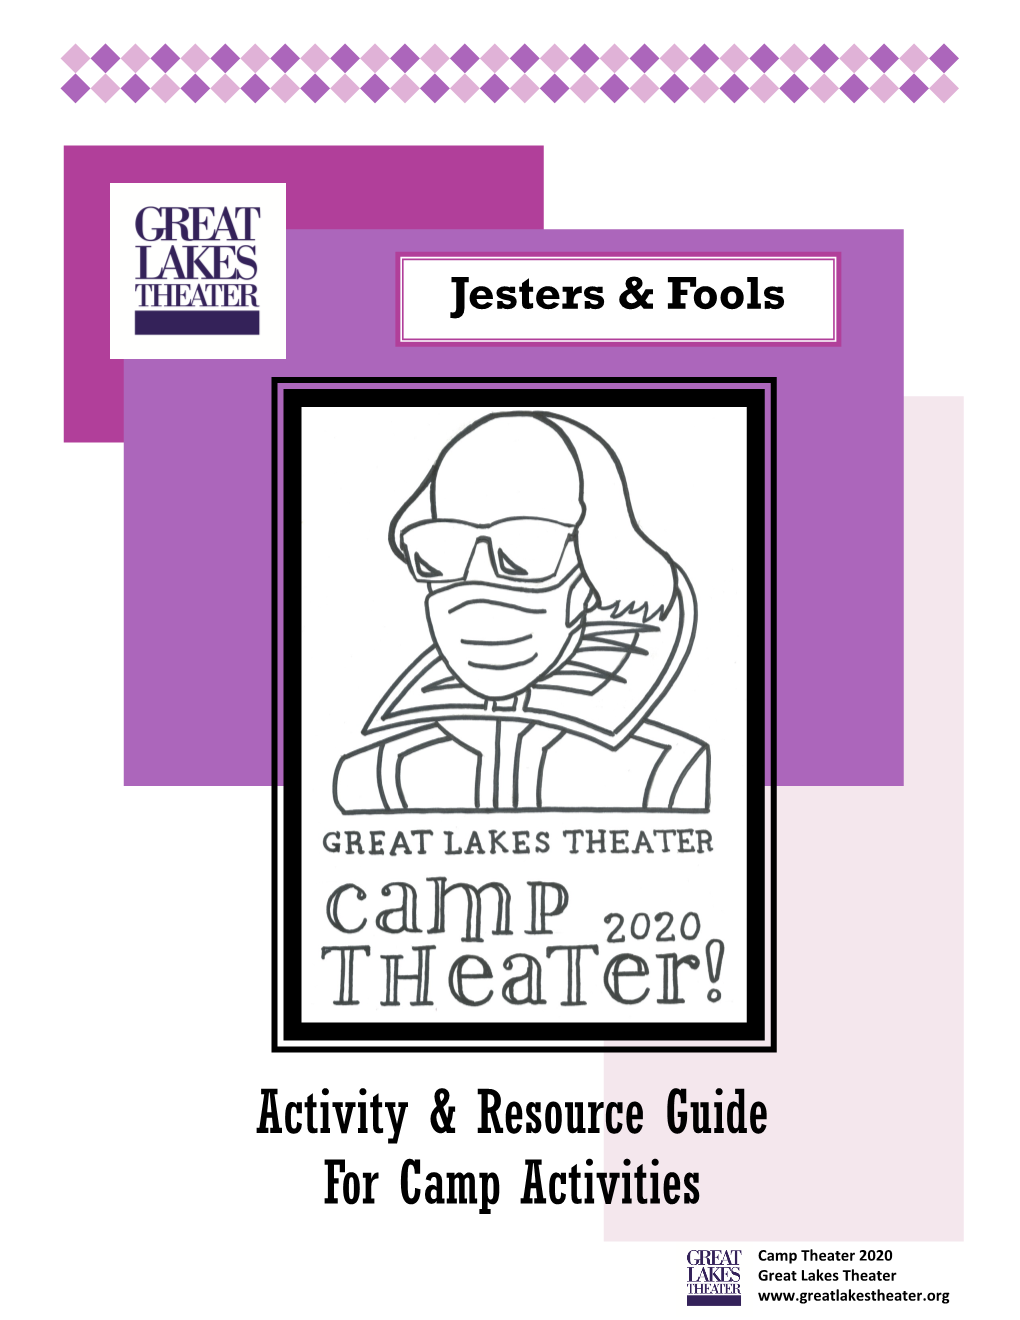 Activity & Resource Guide for Camp Activities